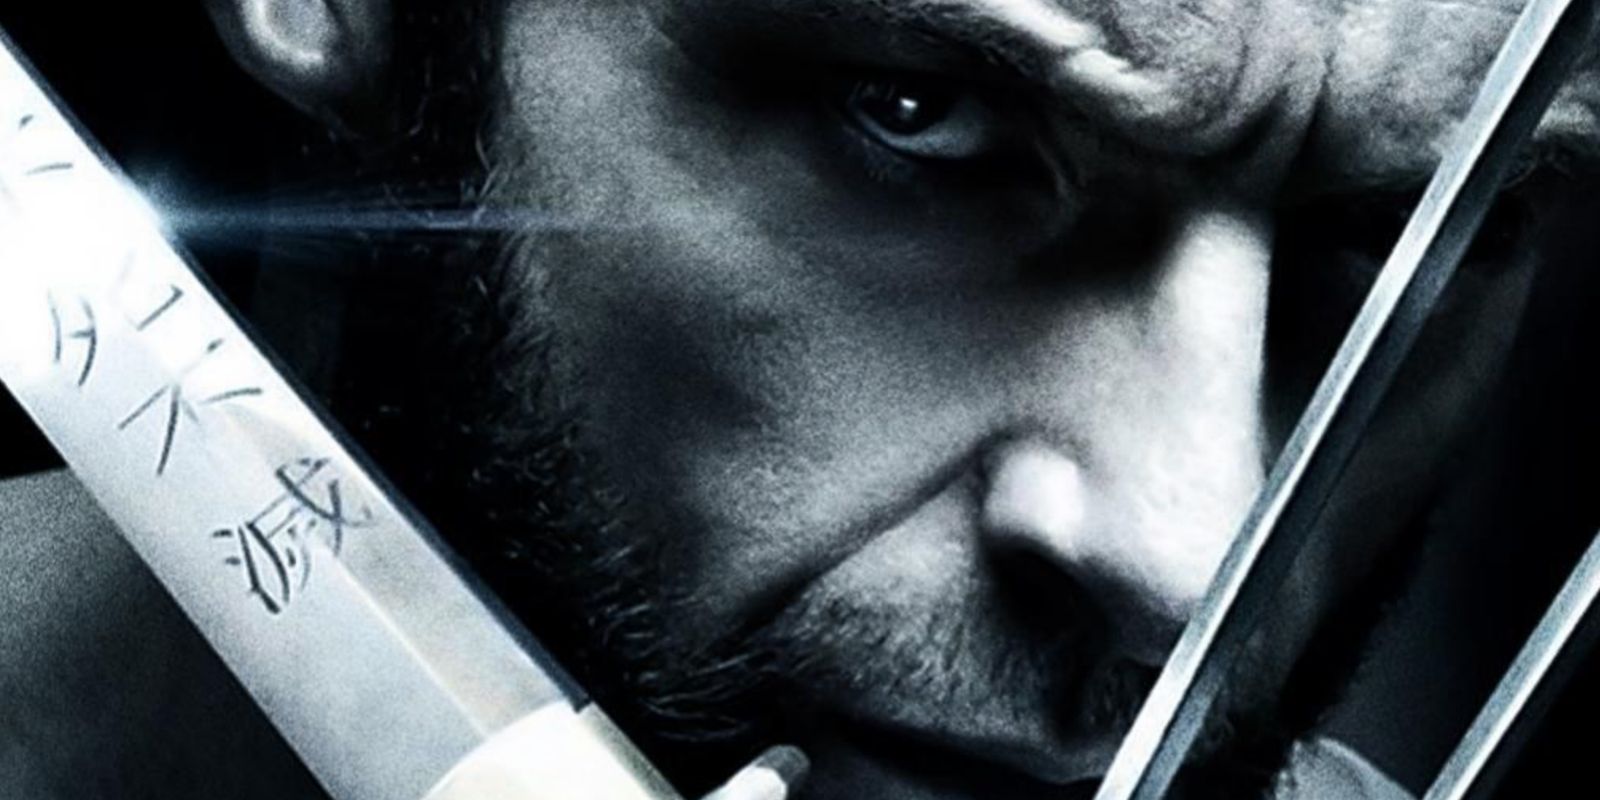 Wolverine 3 wraps filming in New Mexico